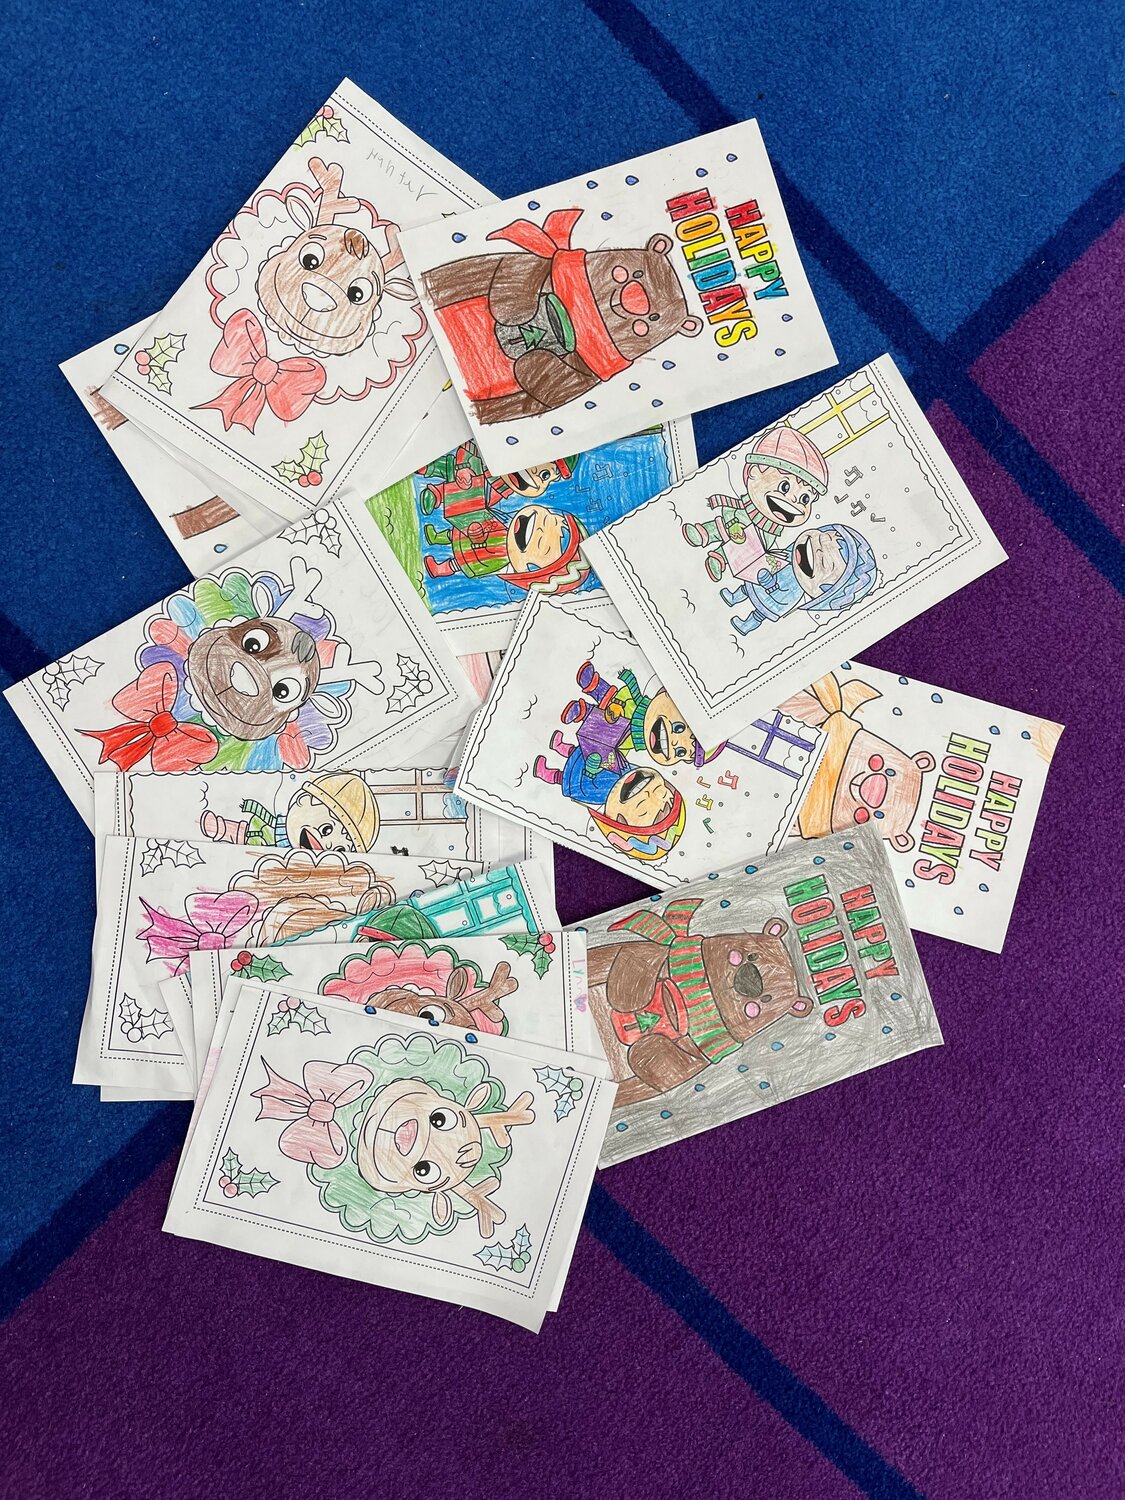 - Orlo Avenue students decorated Holiday cards for RI Operation Holiday Cheer.  These cards will be going overseas to military personnel who can't be home for the holidays.
--